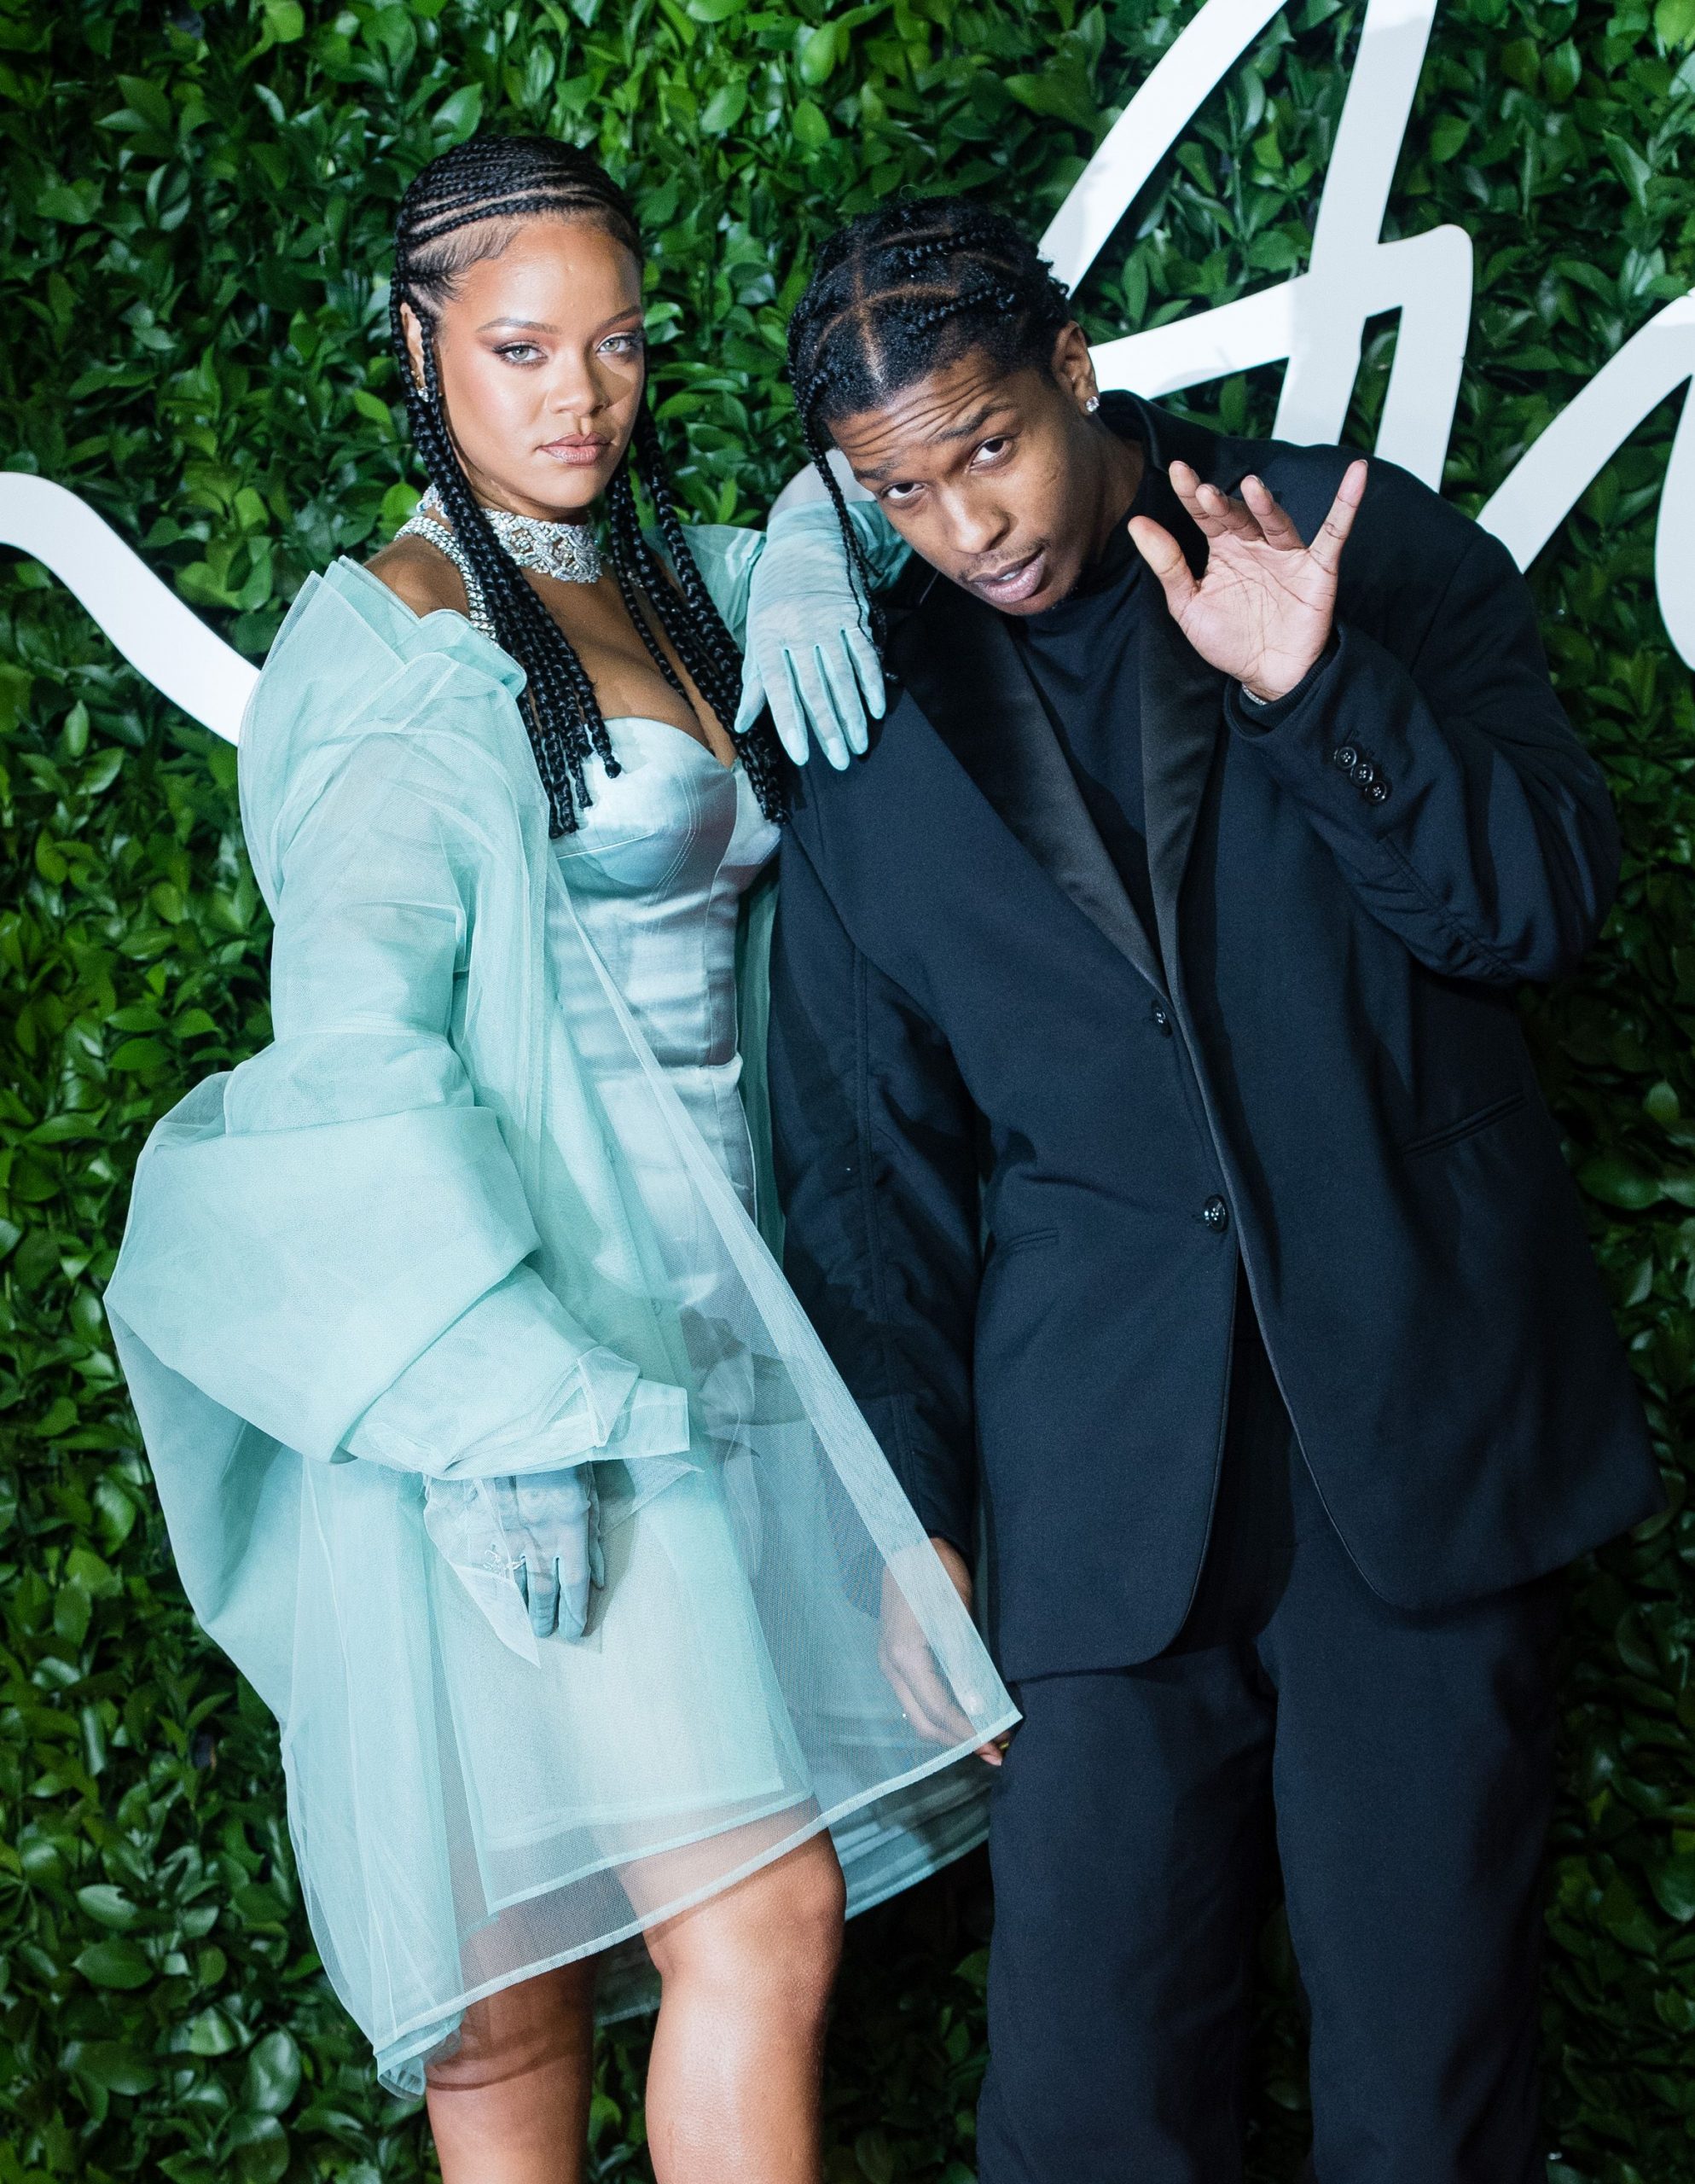 How Long Has ASAP Rocky And Rihanna Been Together